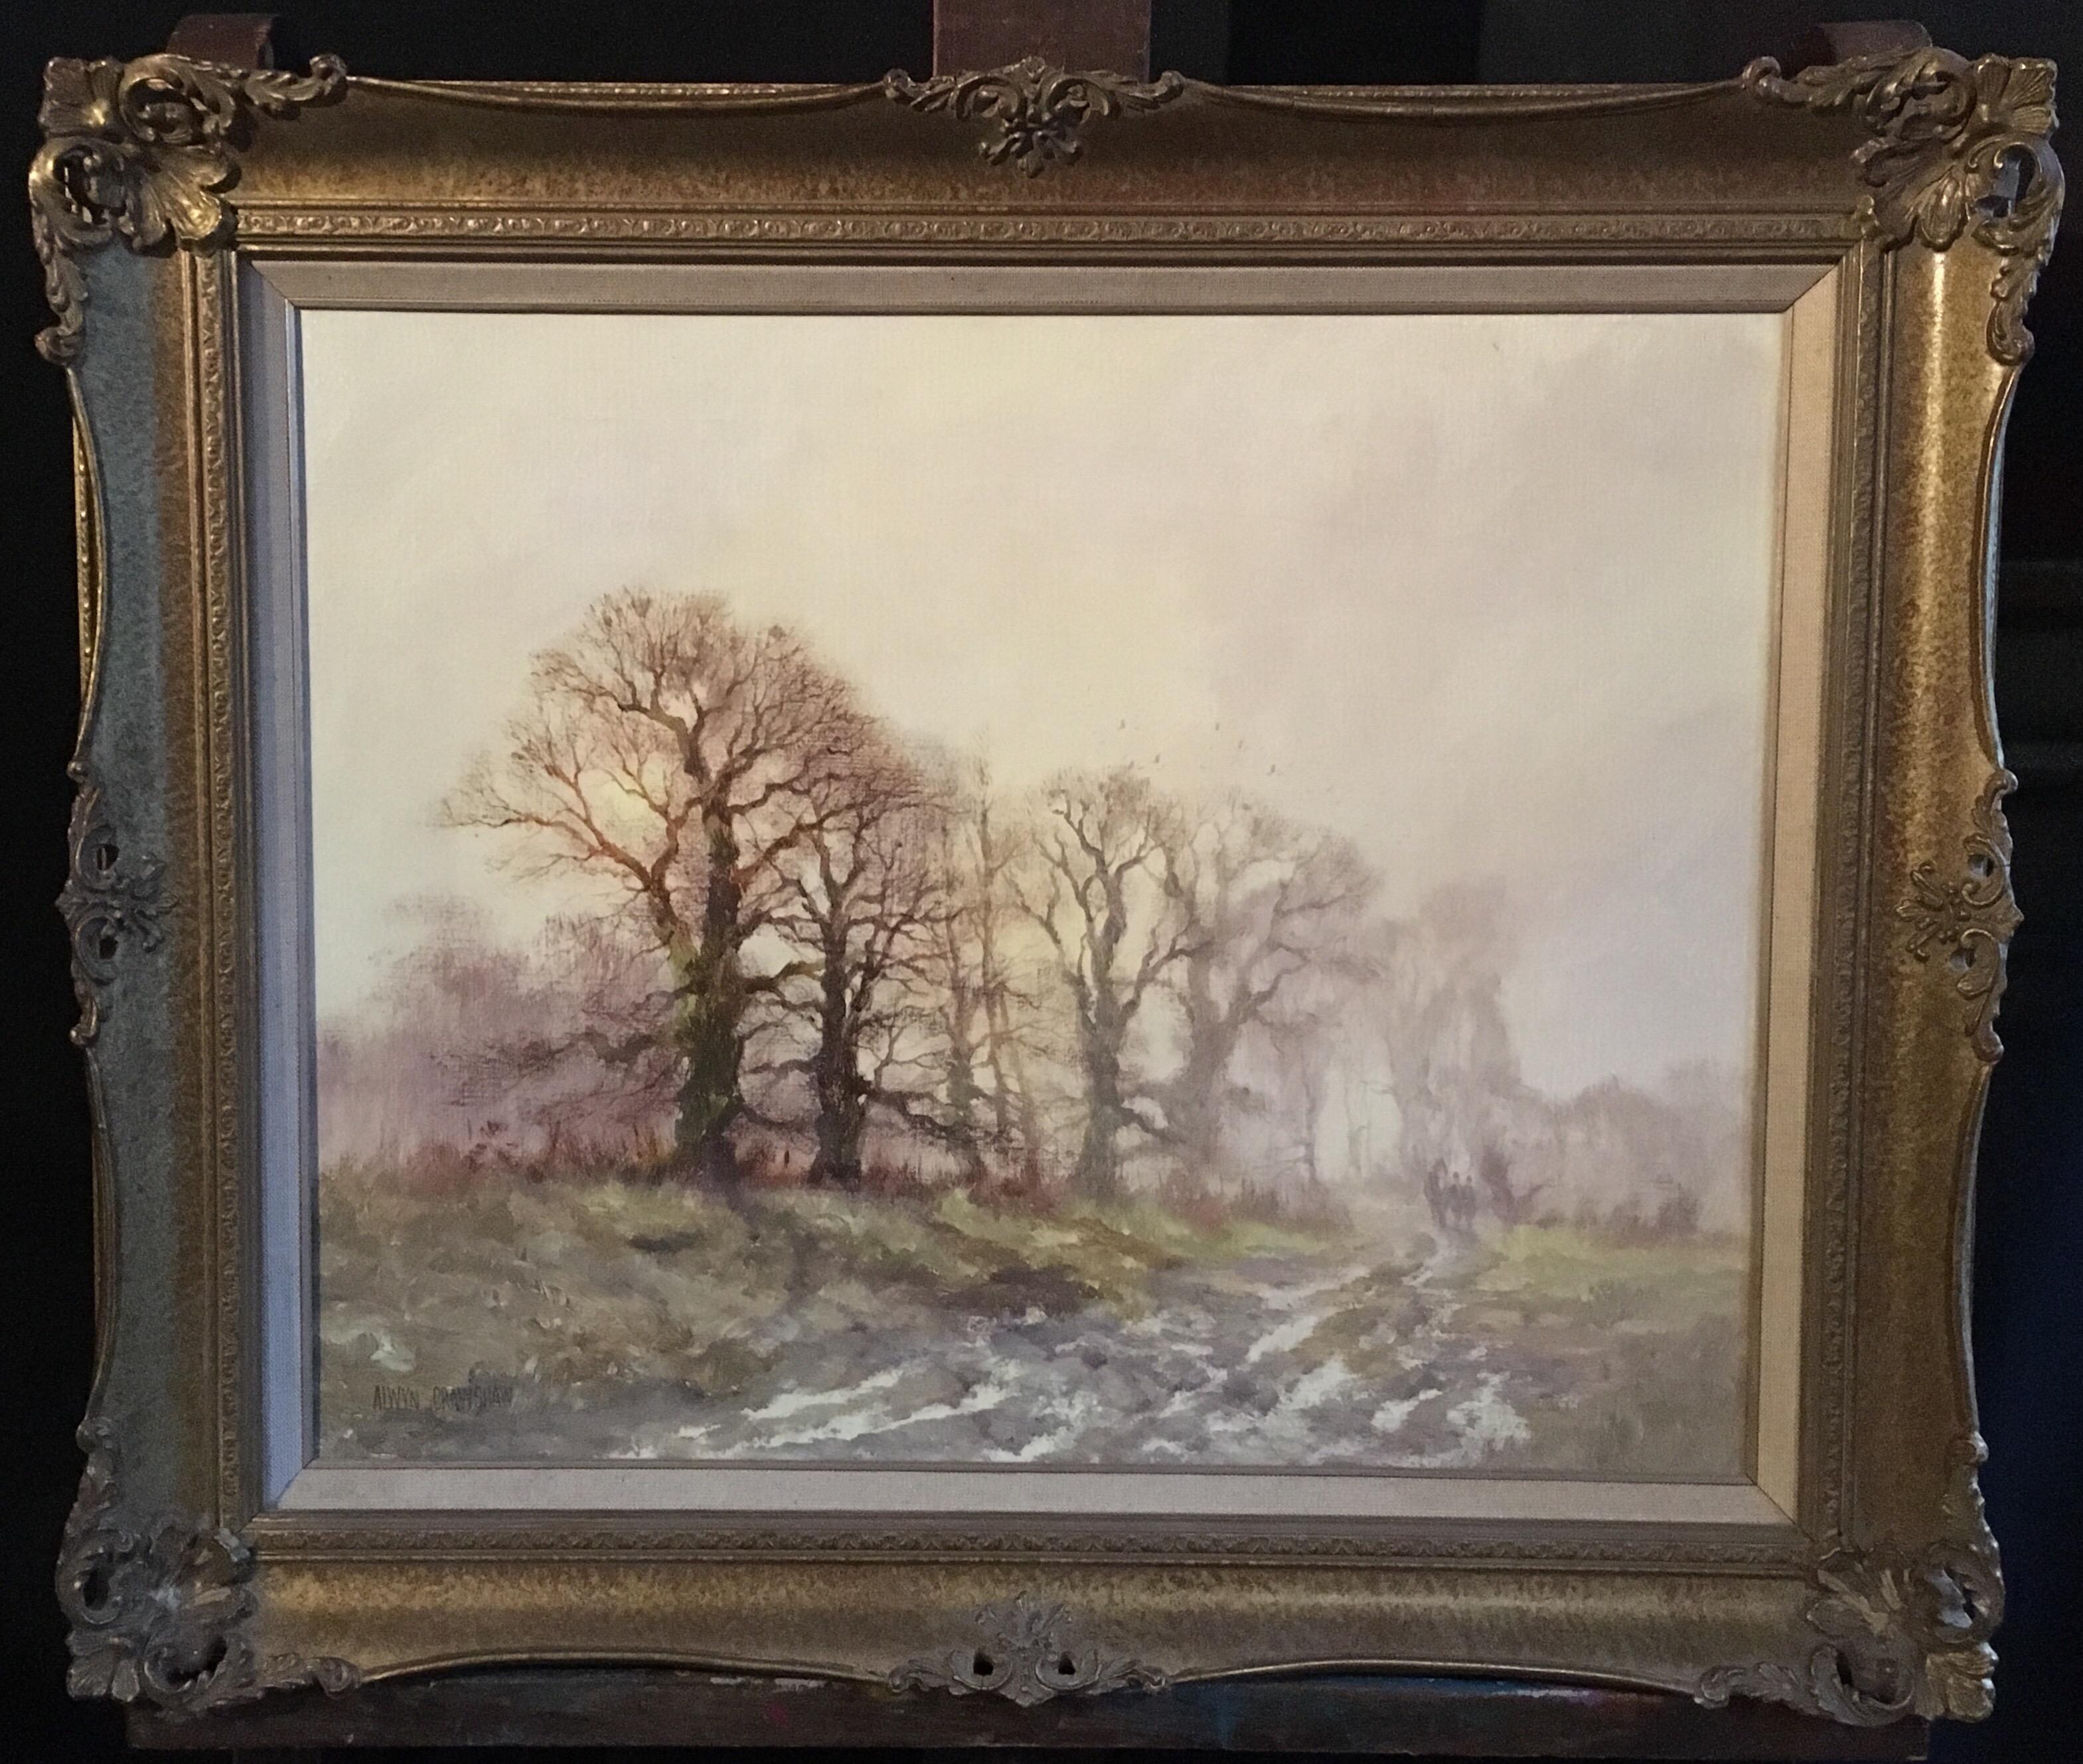 Misty Morning, Impressionist Landscape, Signed, Famous British Artist - Painting by Alwyn Crawshaw